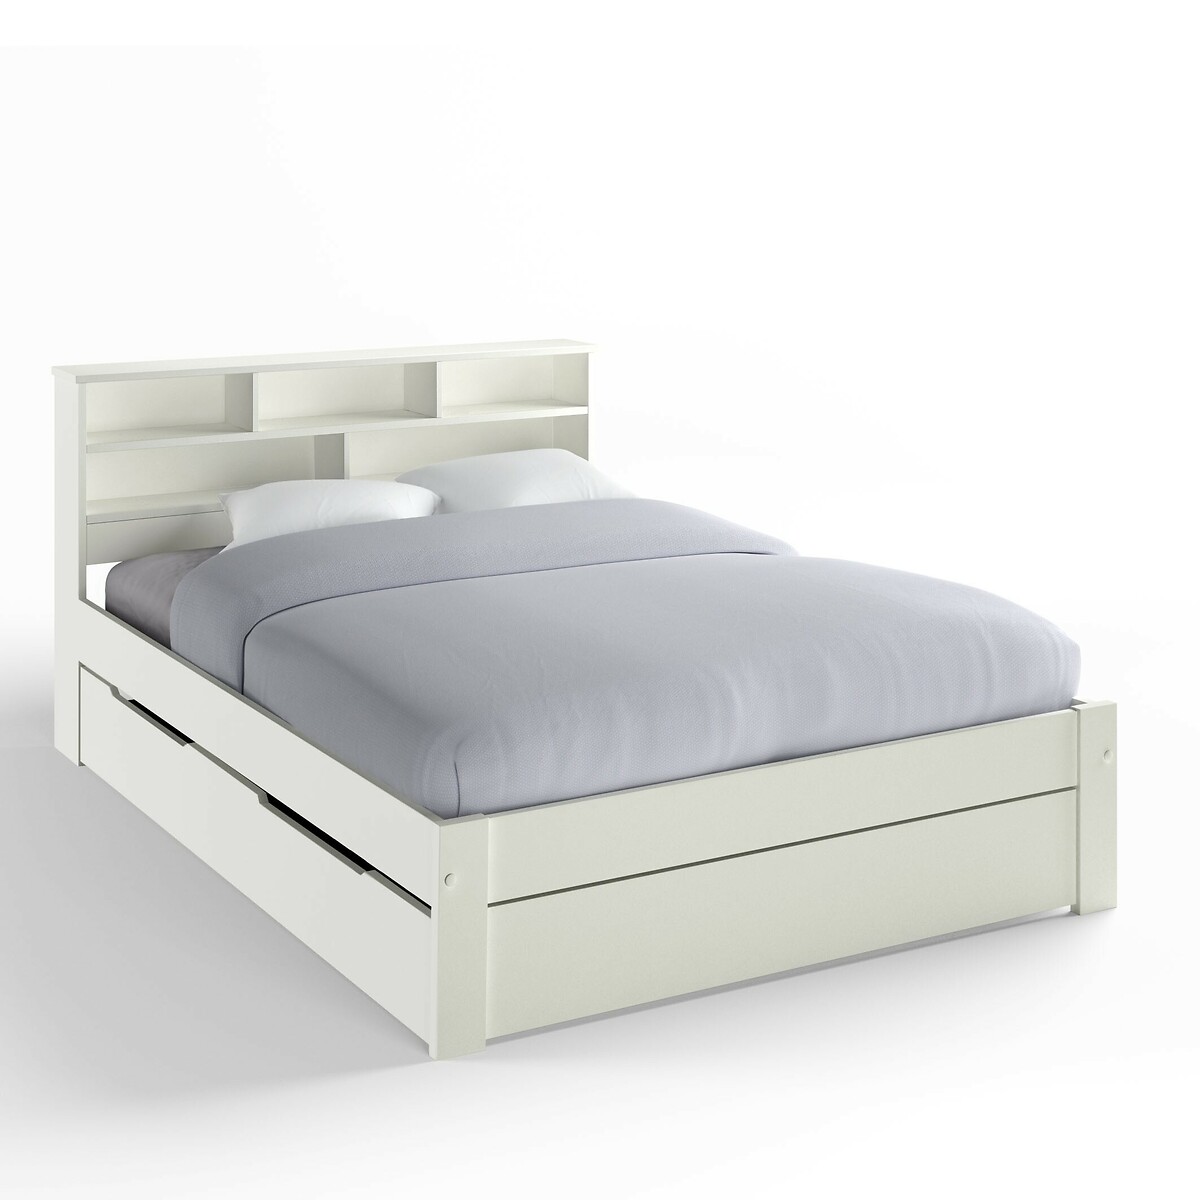 Nikkö Bed With Headboard White La, White Solid Pine Bed Frame